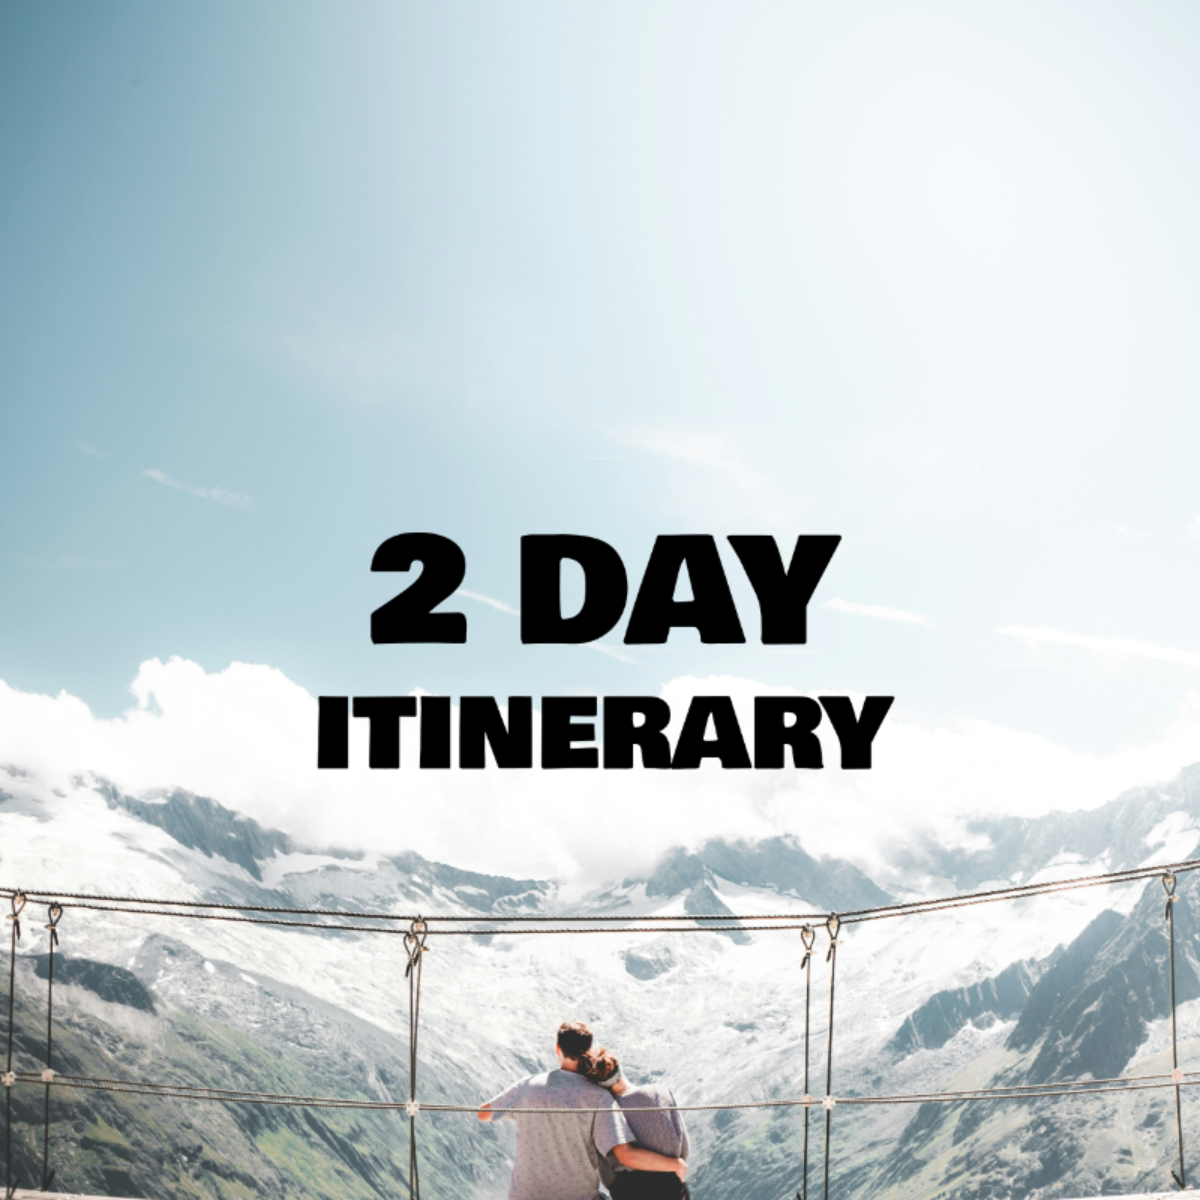 2 Day Itinerary Template